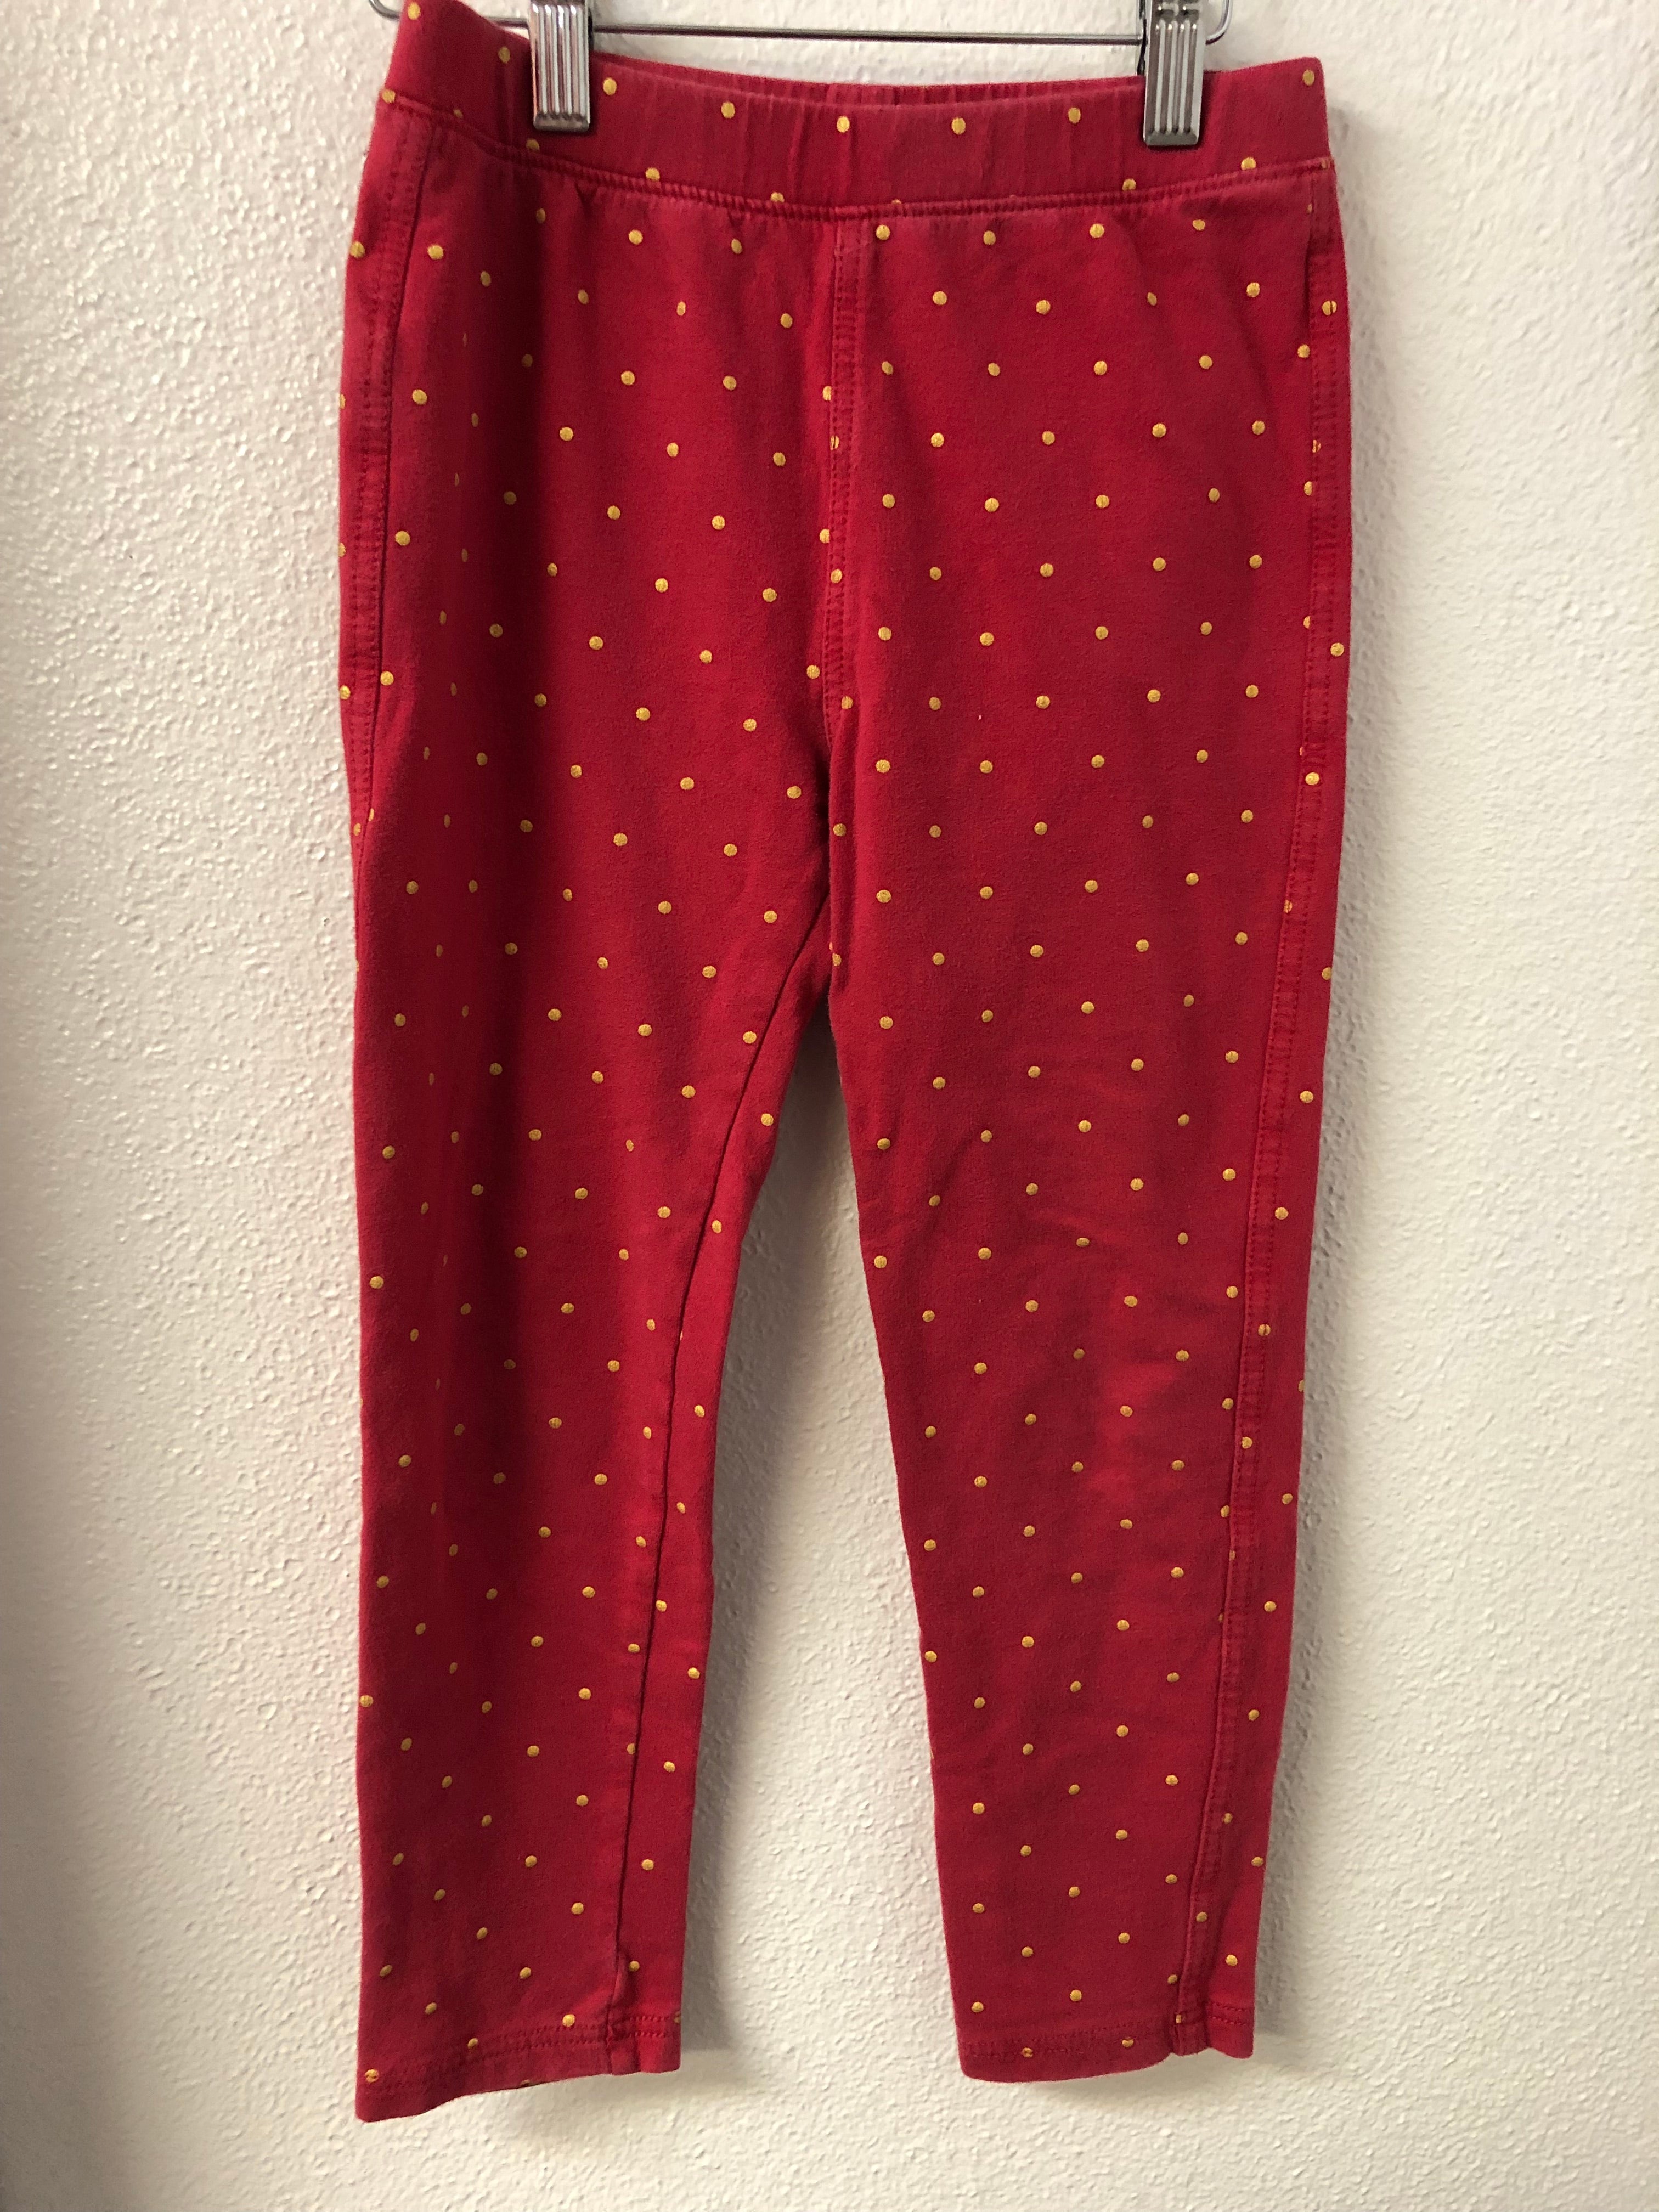 Size 7 Tea Collection Gold Polka Dot Jeggings